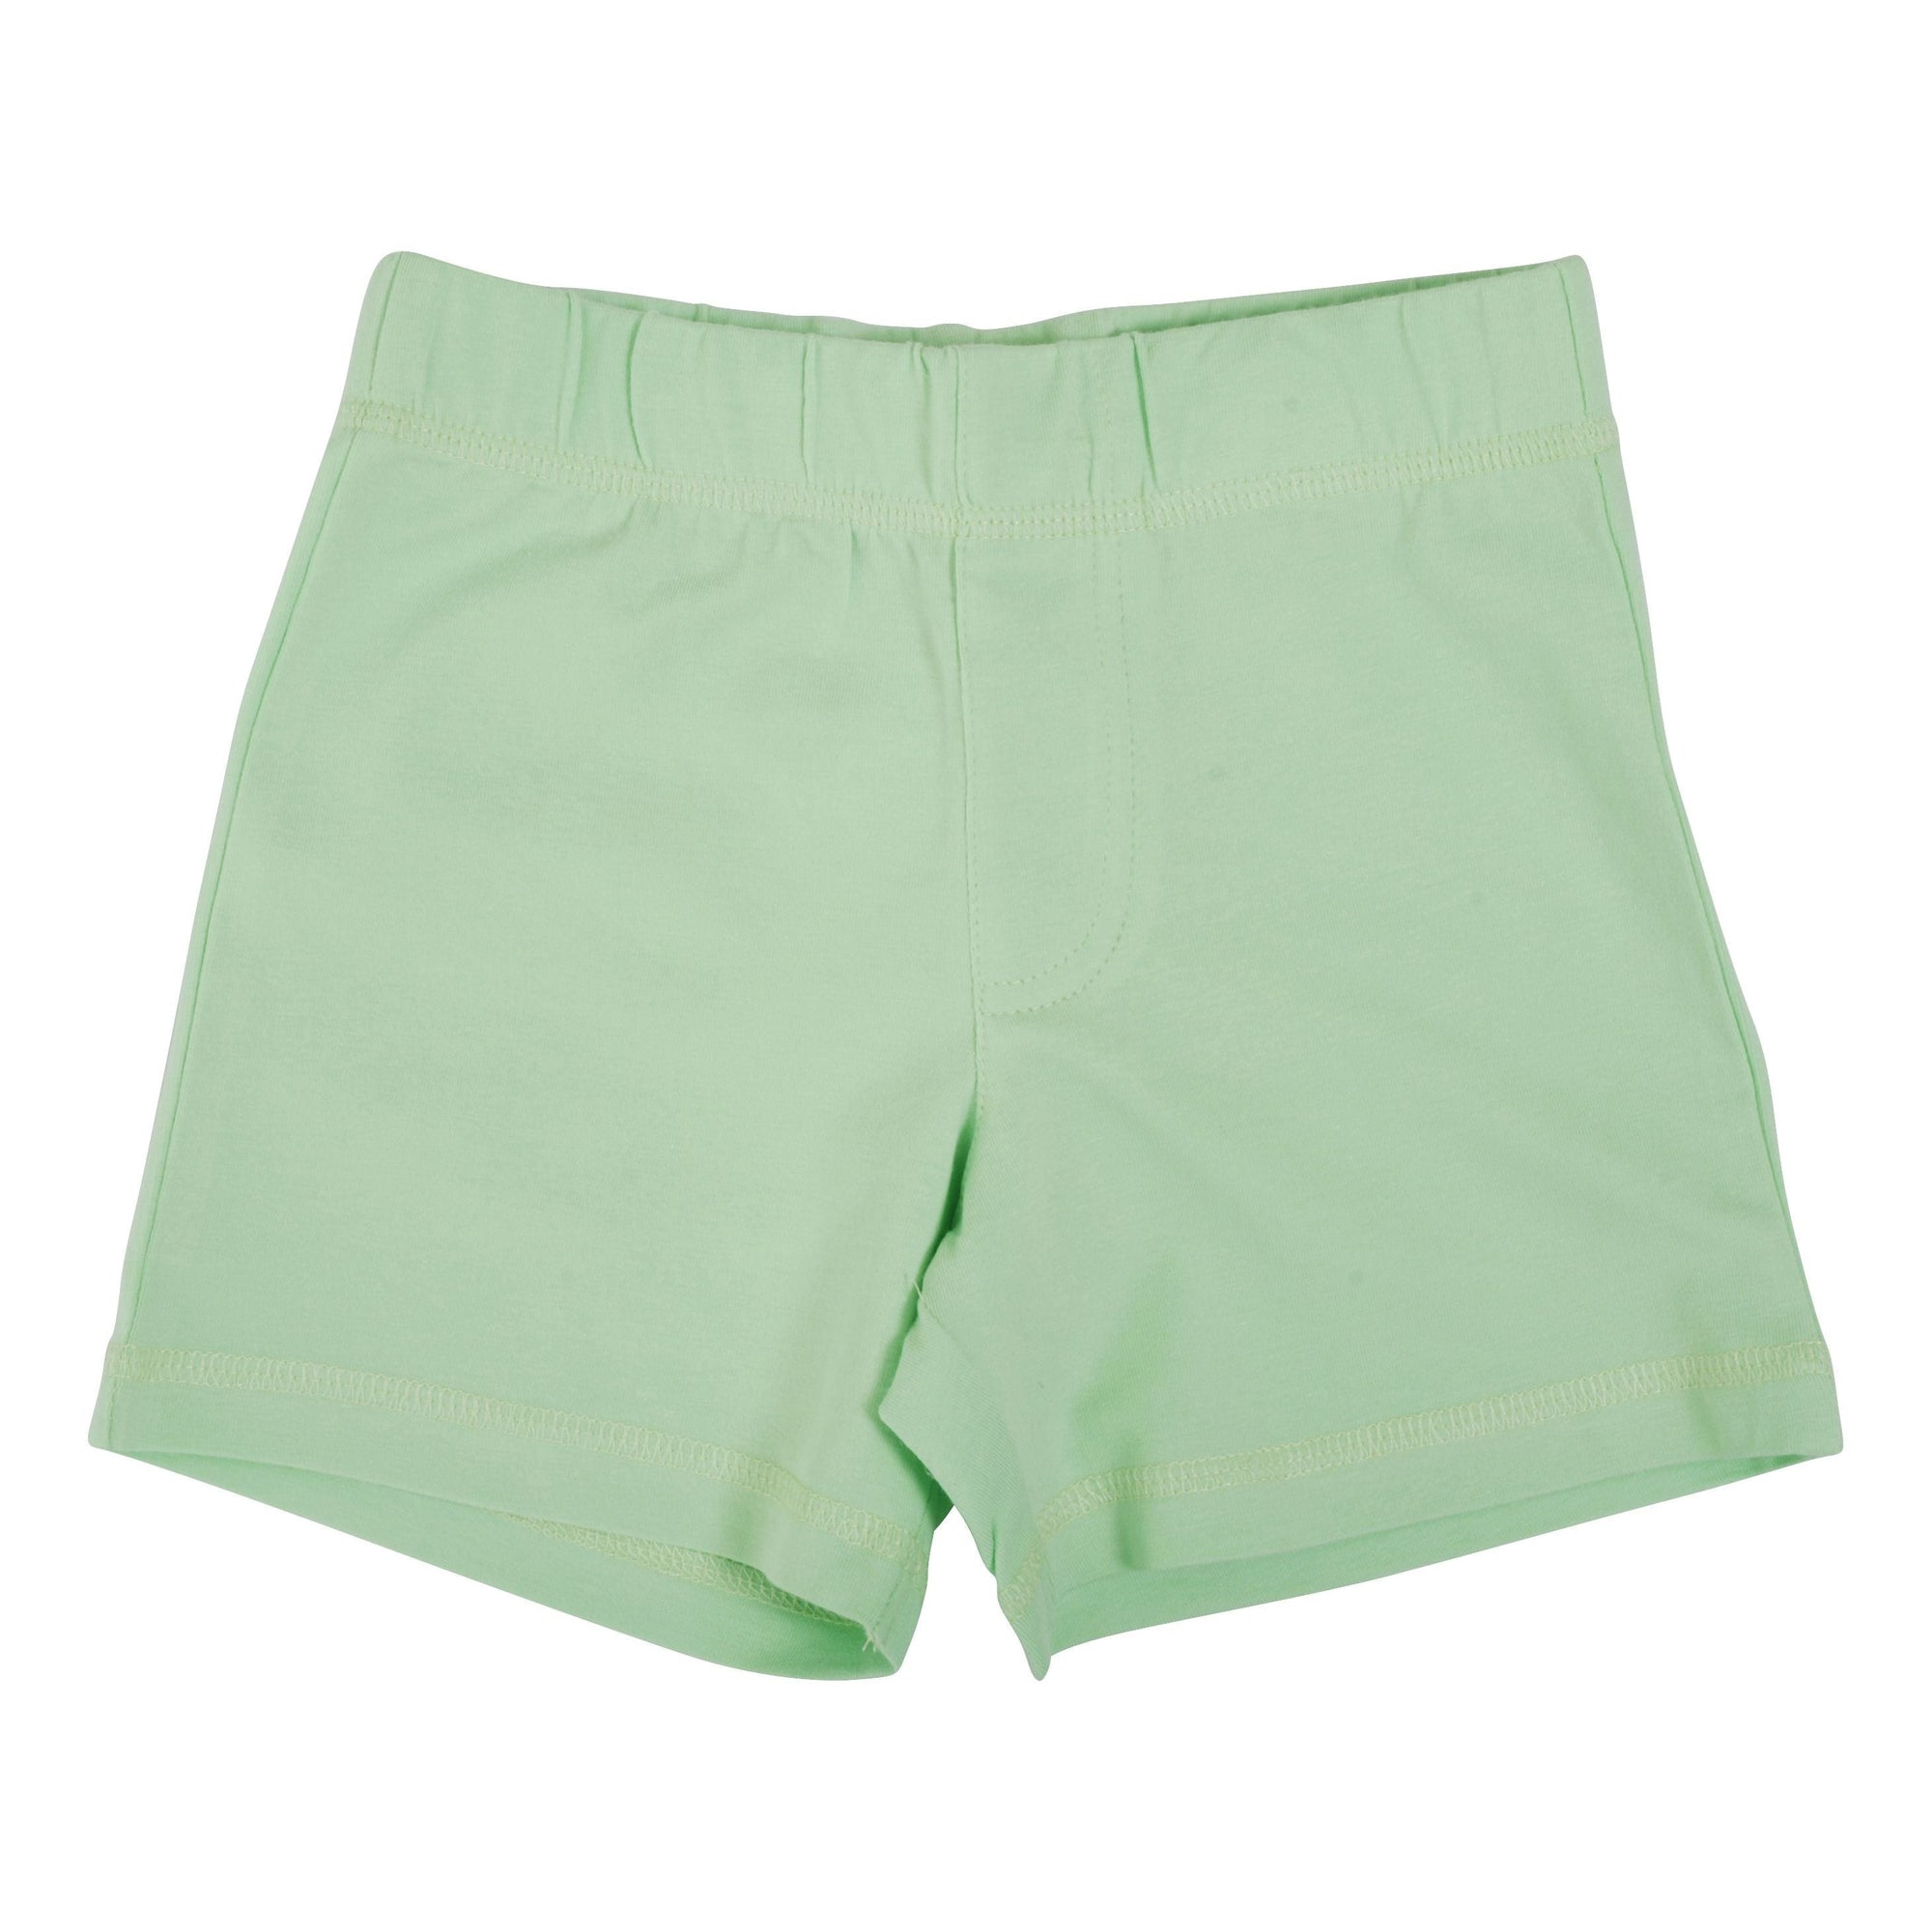 Nile Green Shorts - 1 Left Size 12-14 years-More Than A Fling-Modern Rascals